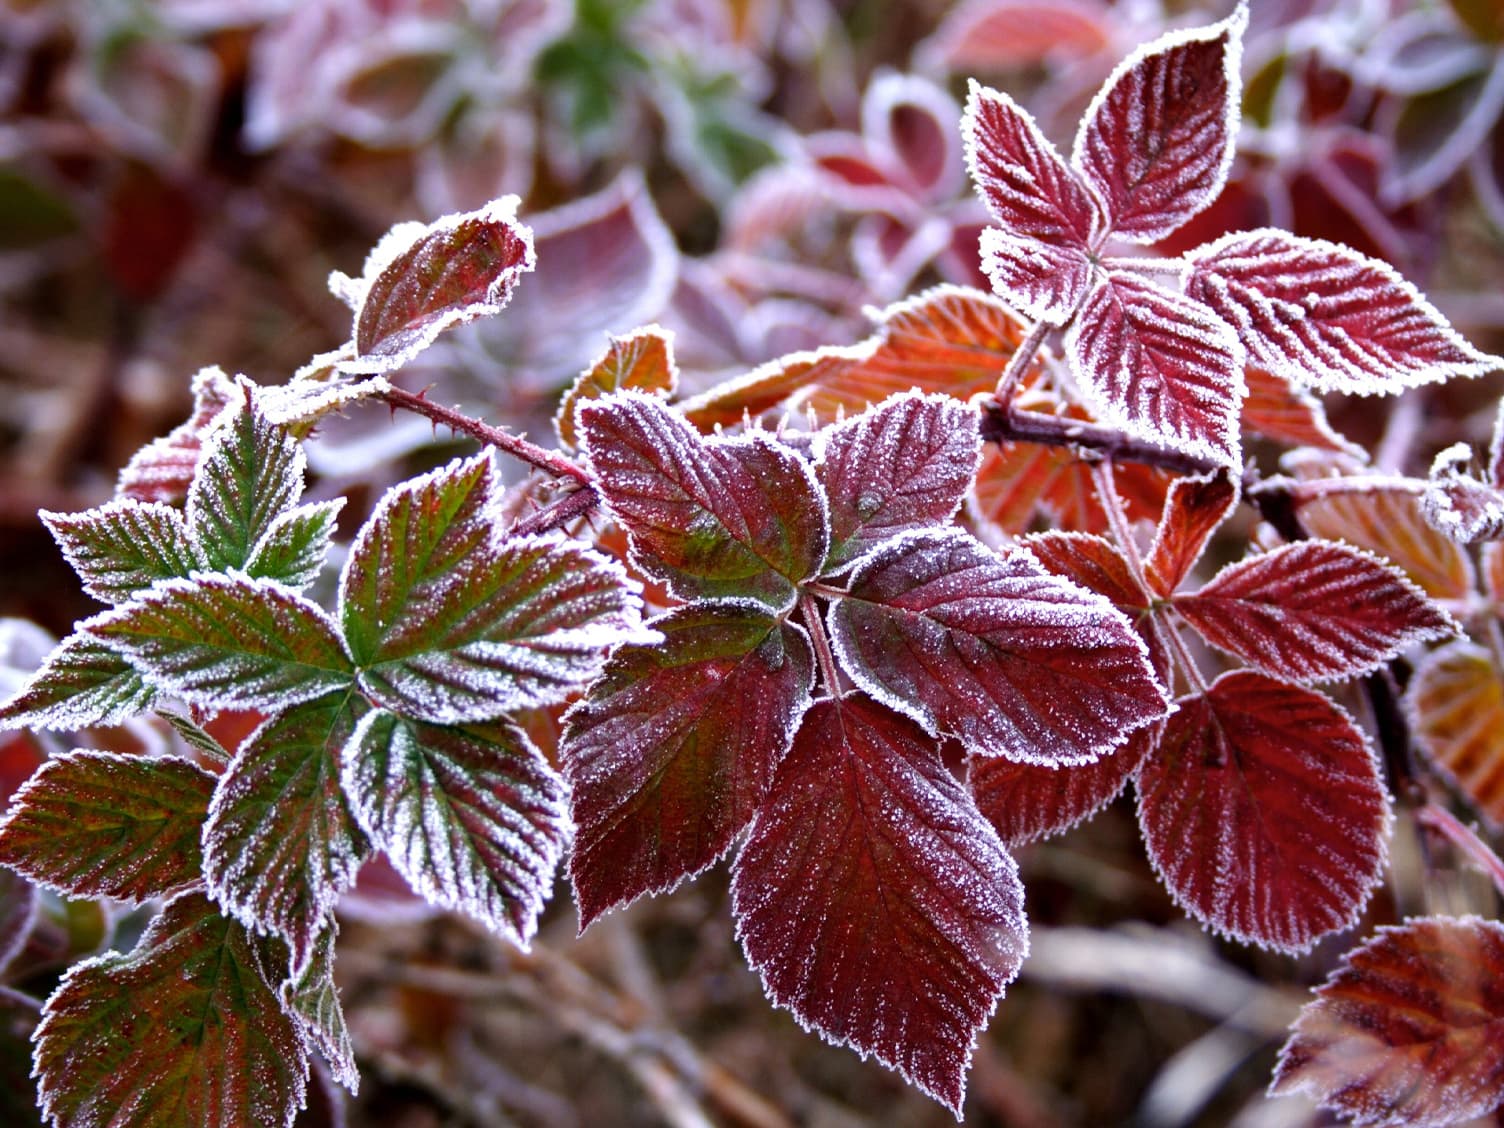 Leaves with frost